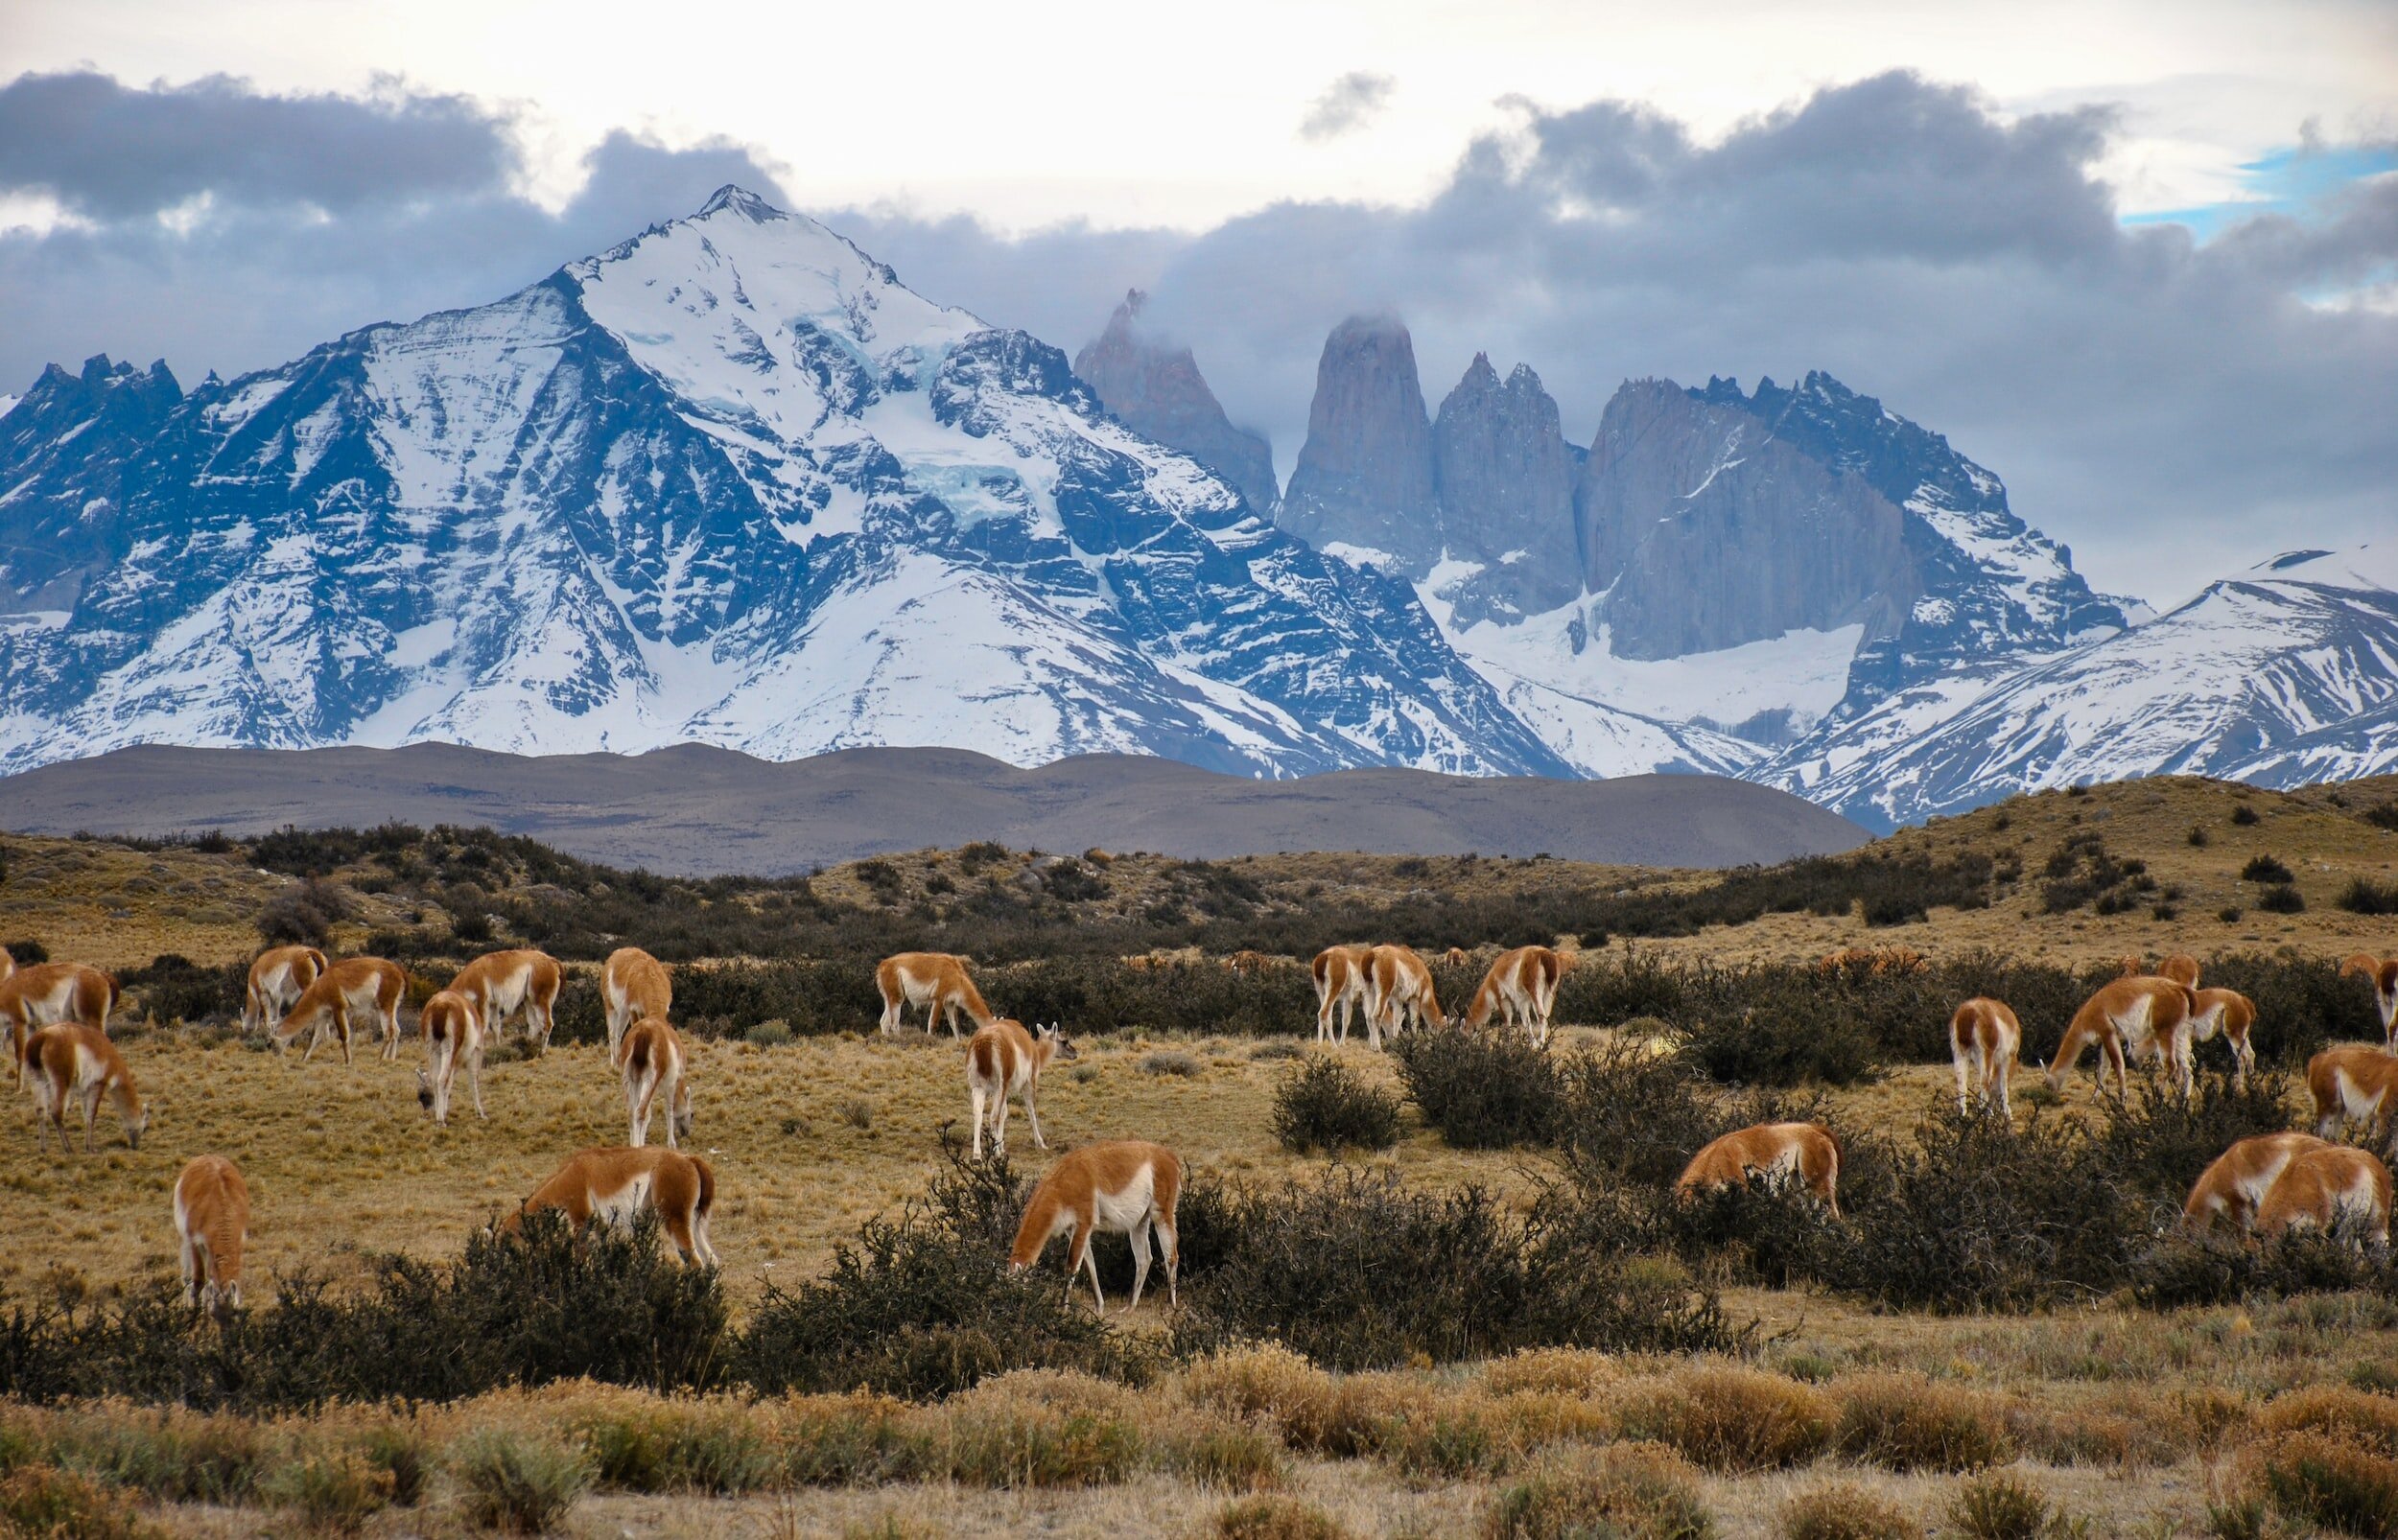 11 Breathtaking Photos from Torres del Paine National Park